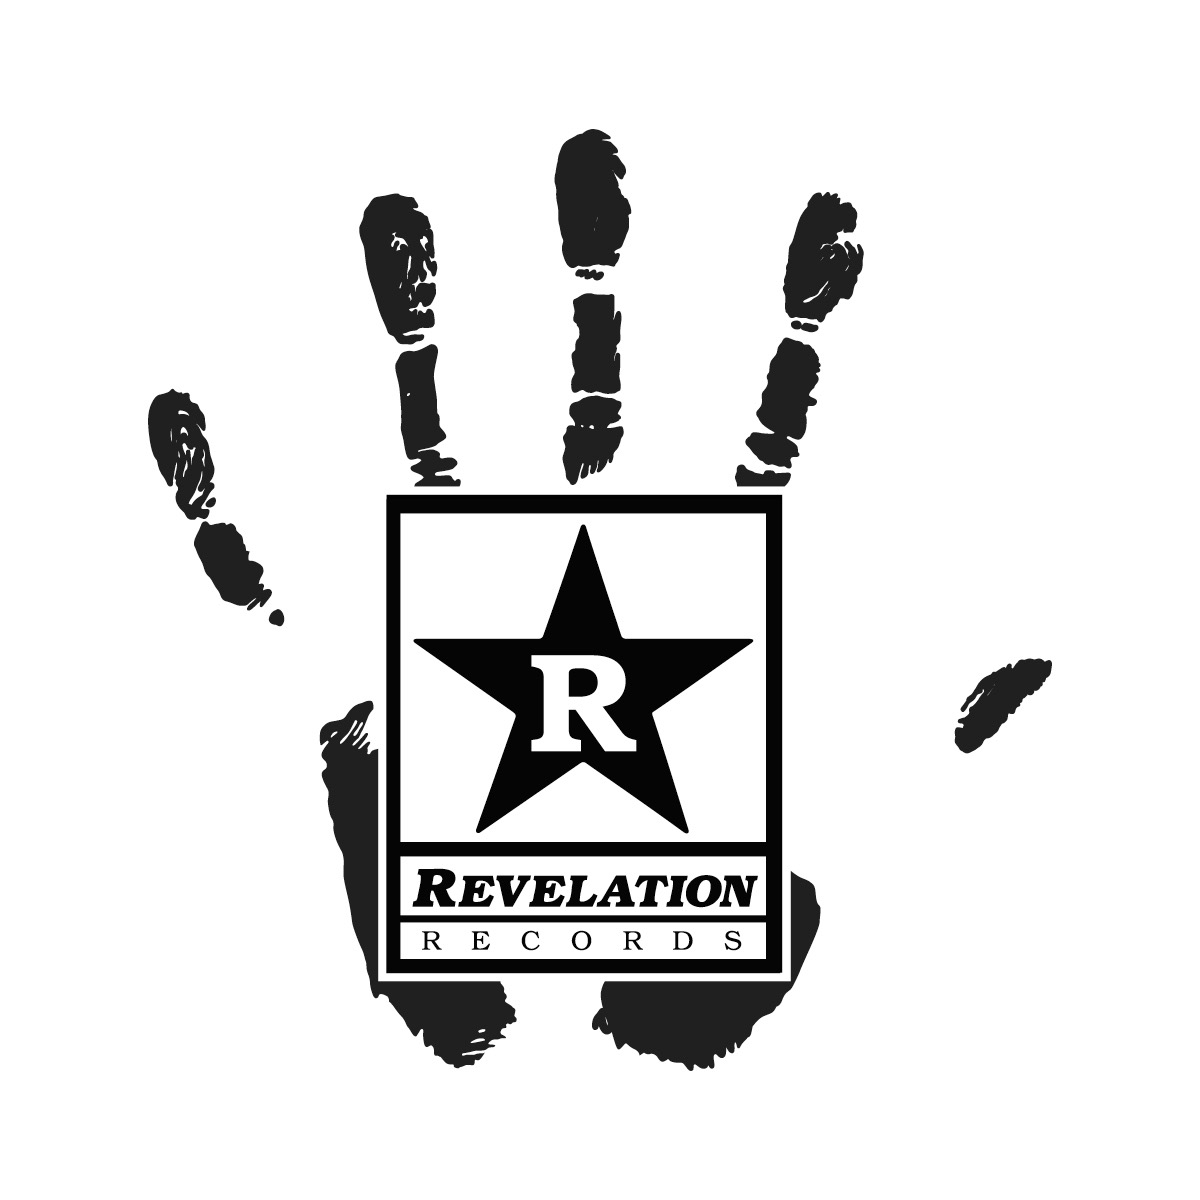 REVELATION RECORDS TO RELEASE TURNING POINT'S ENTIRE CATALOG 